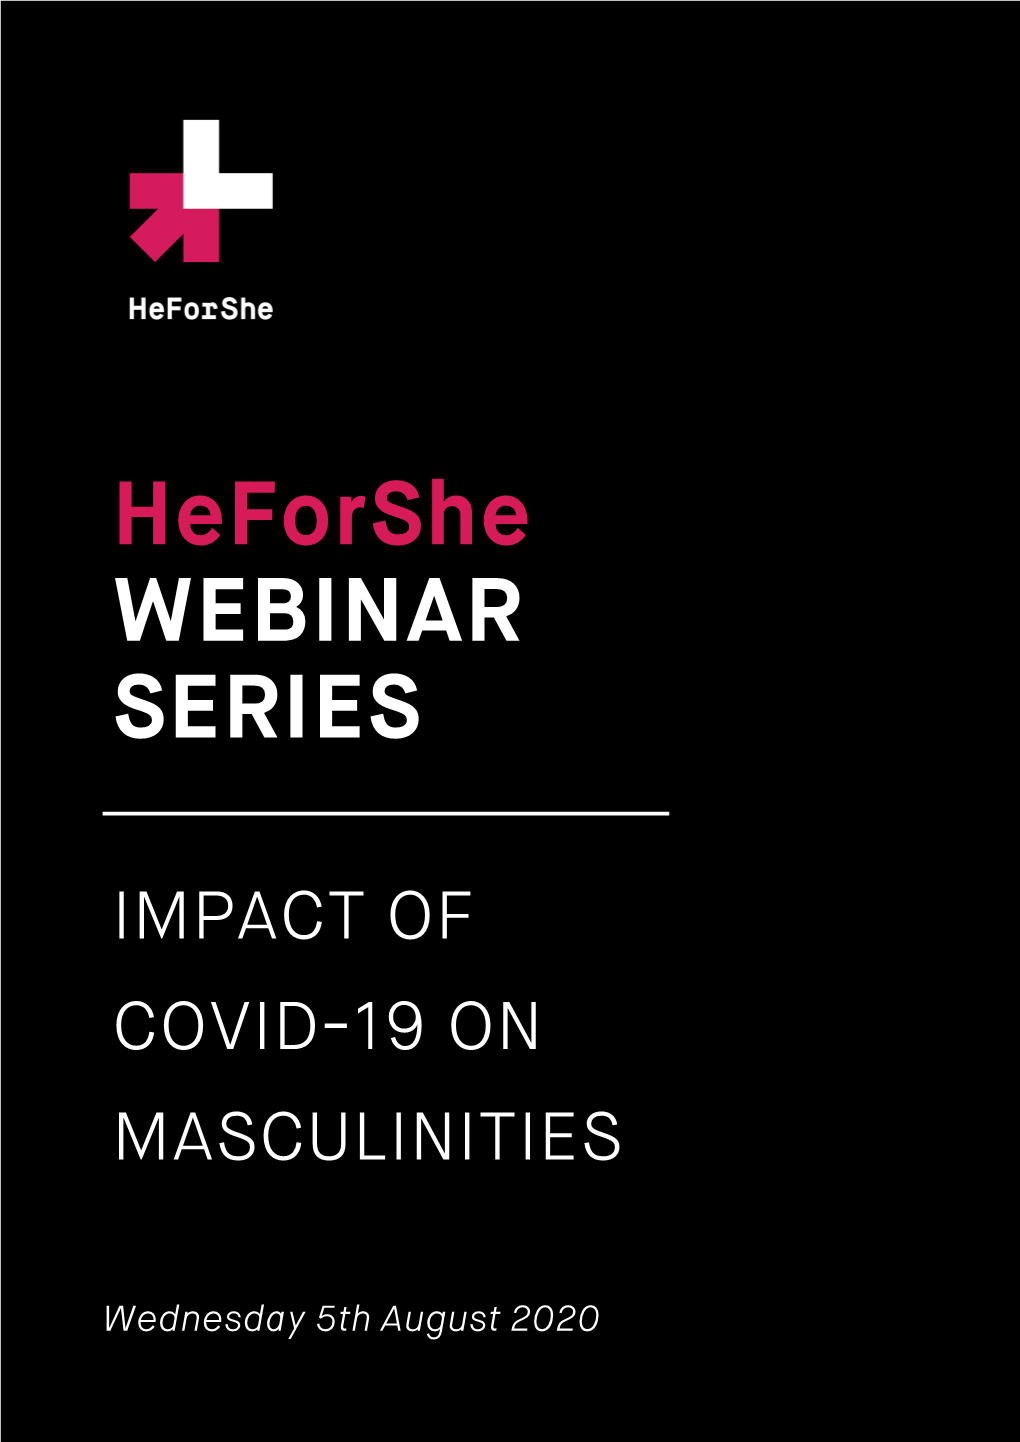 Impact of Covid-19 on Masculinities